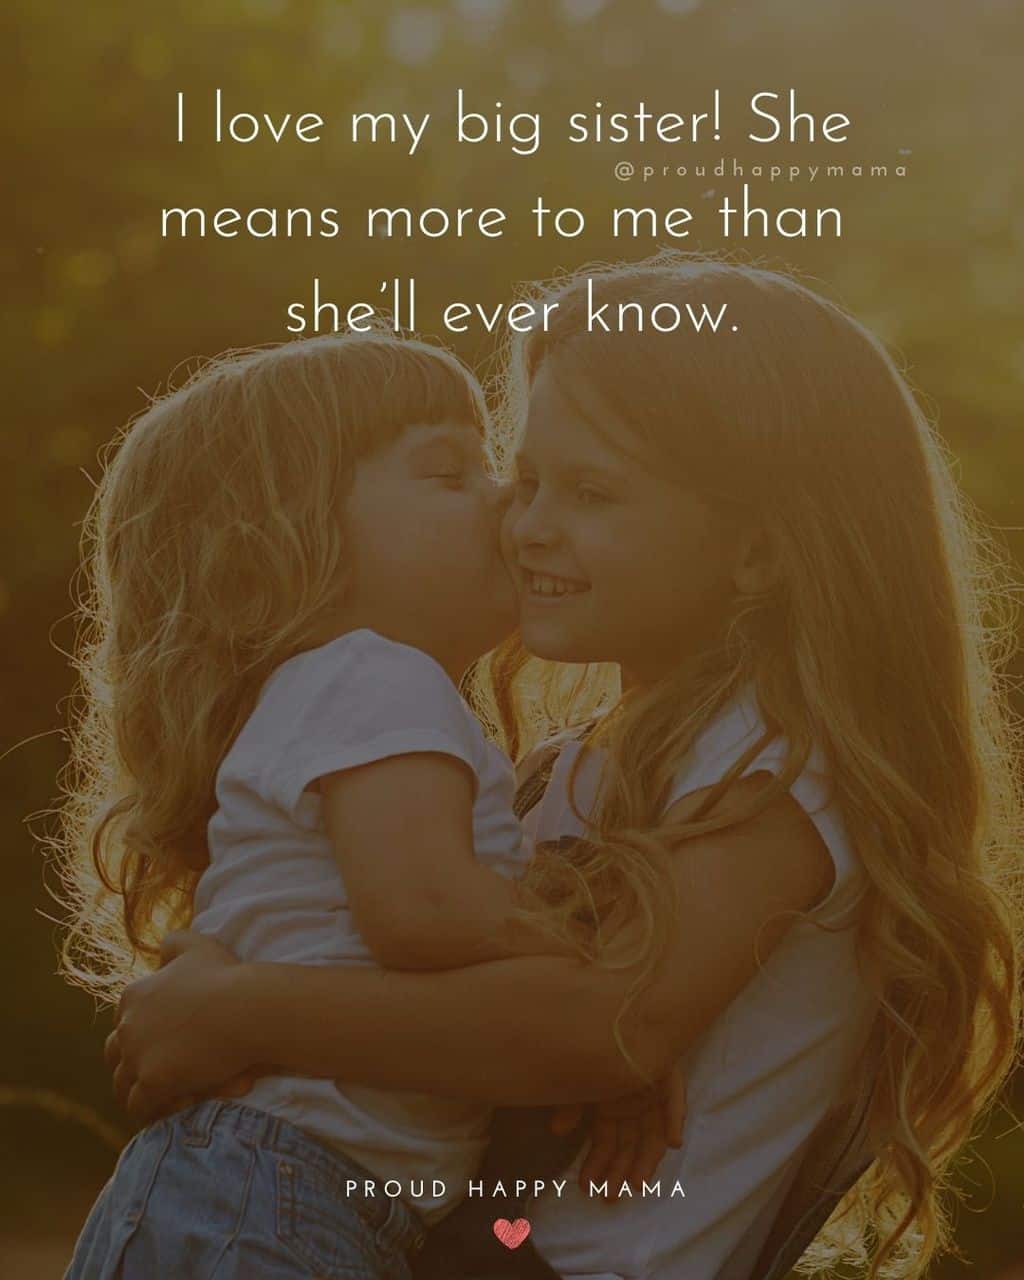 50 Big Sister Quotes And Sayings (With Images)